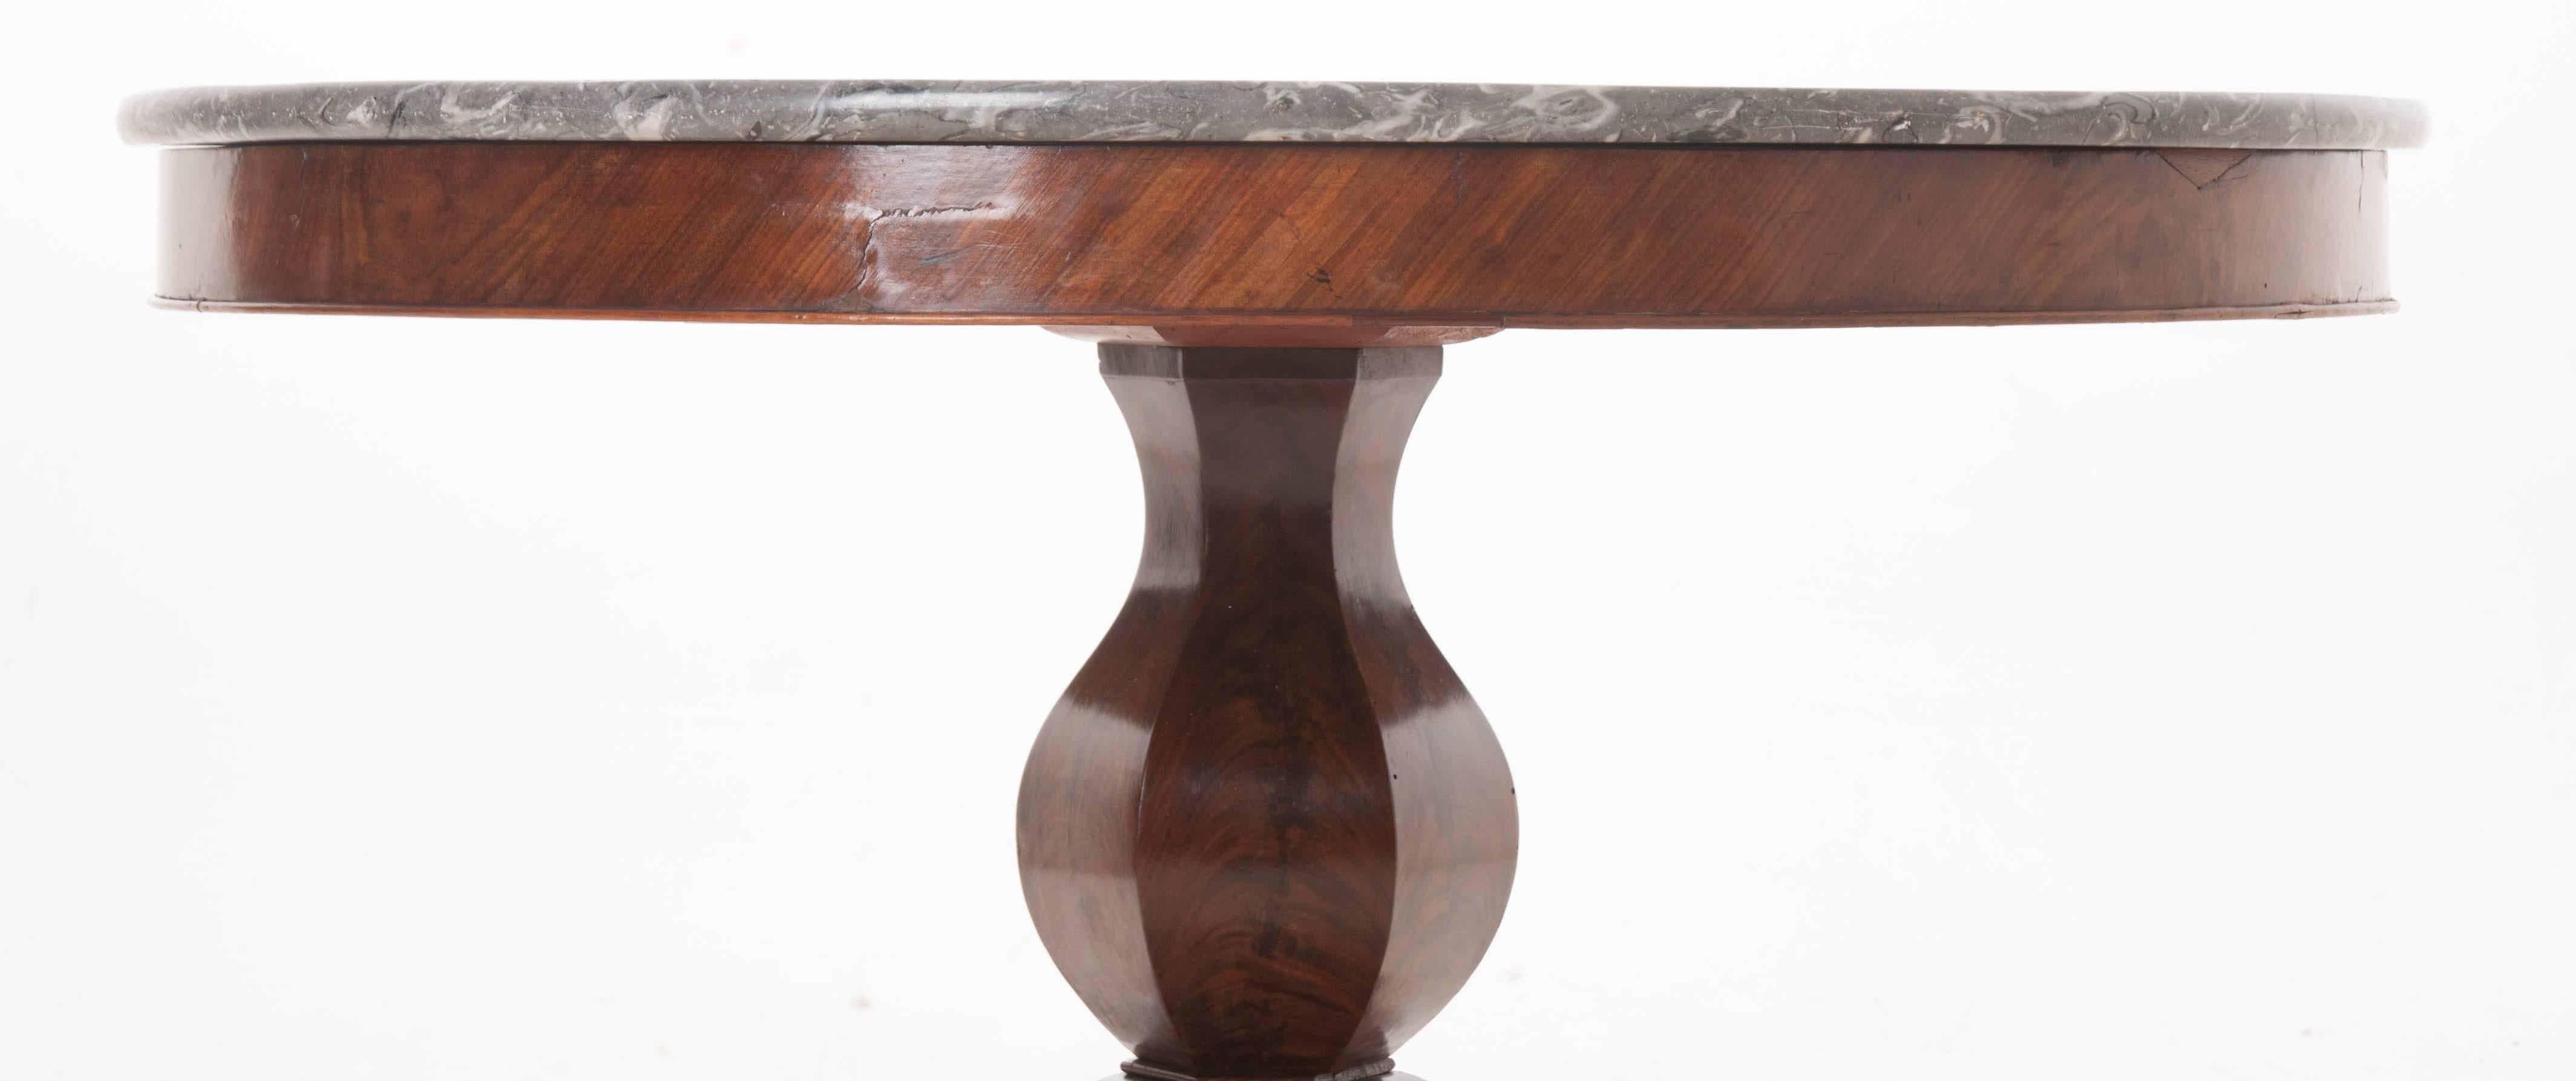 French 19th Century Restauration Mahogany Center Table with Marble Top 1